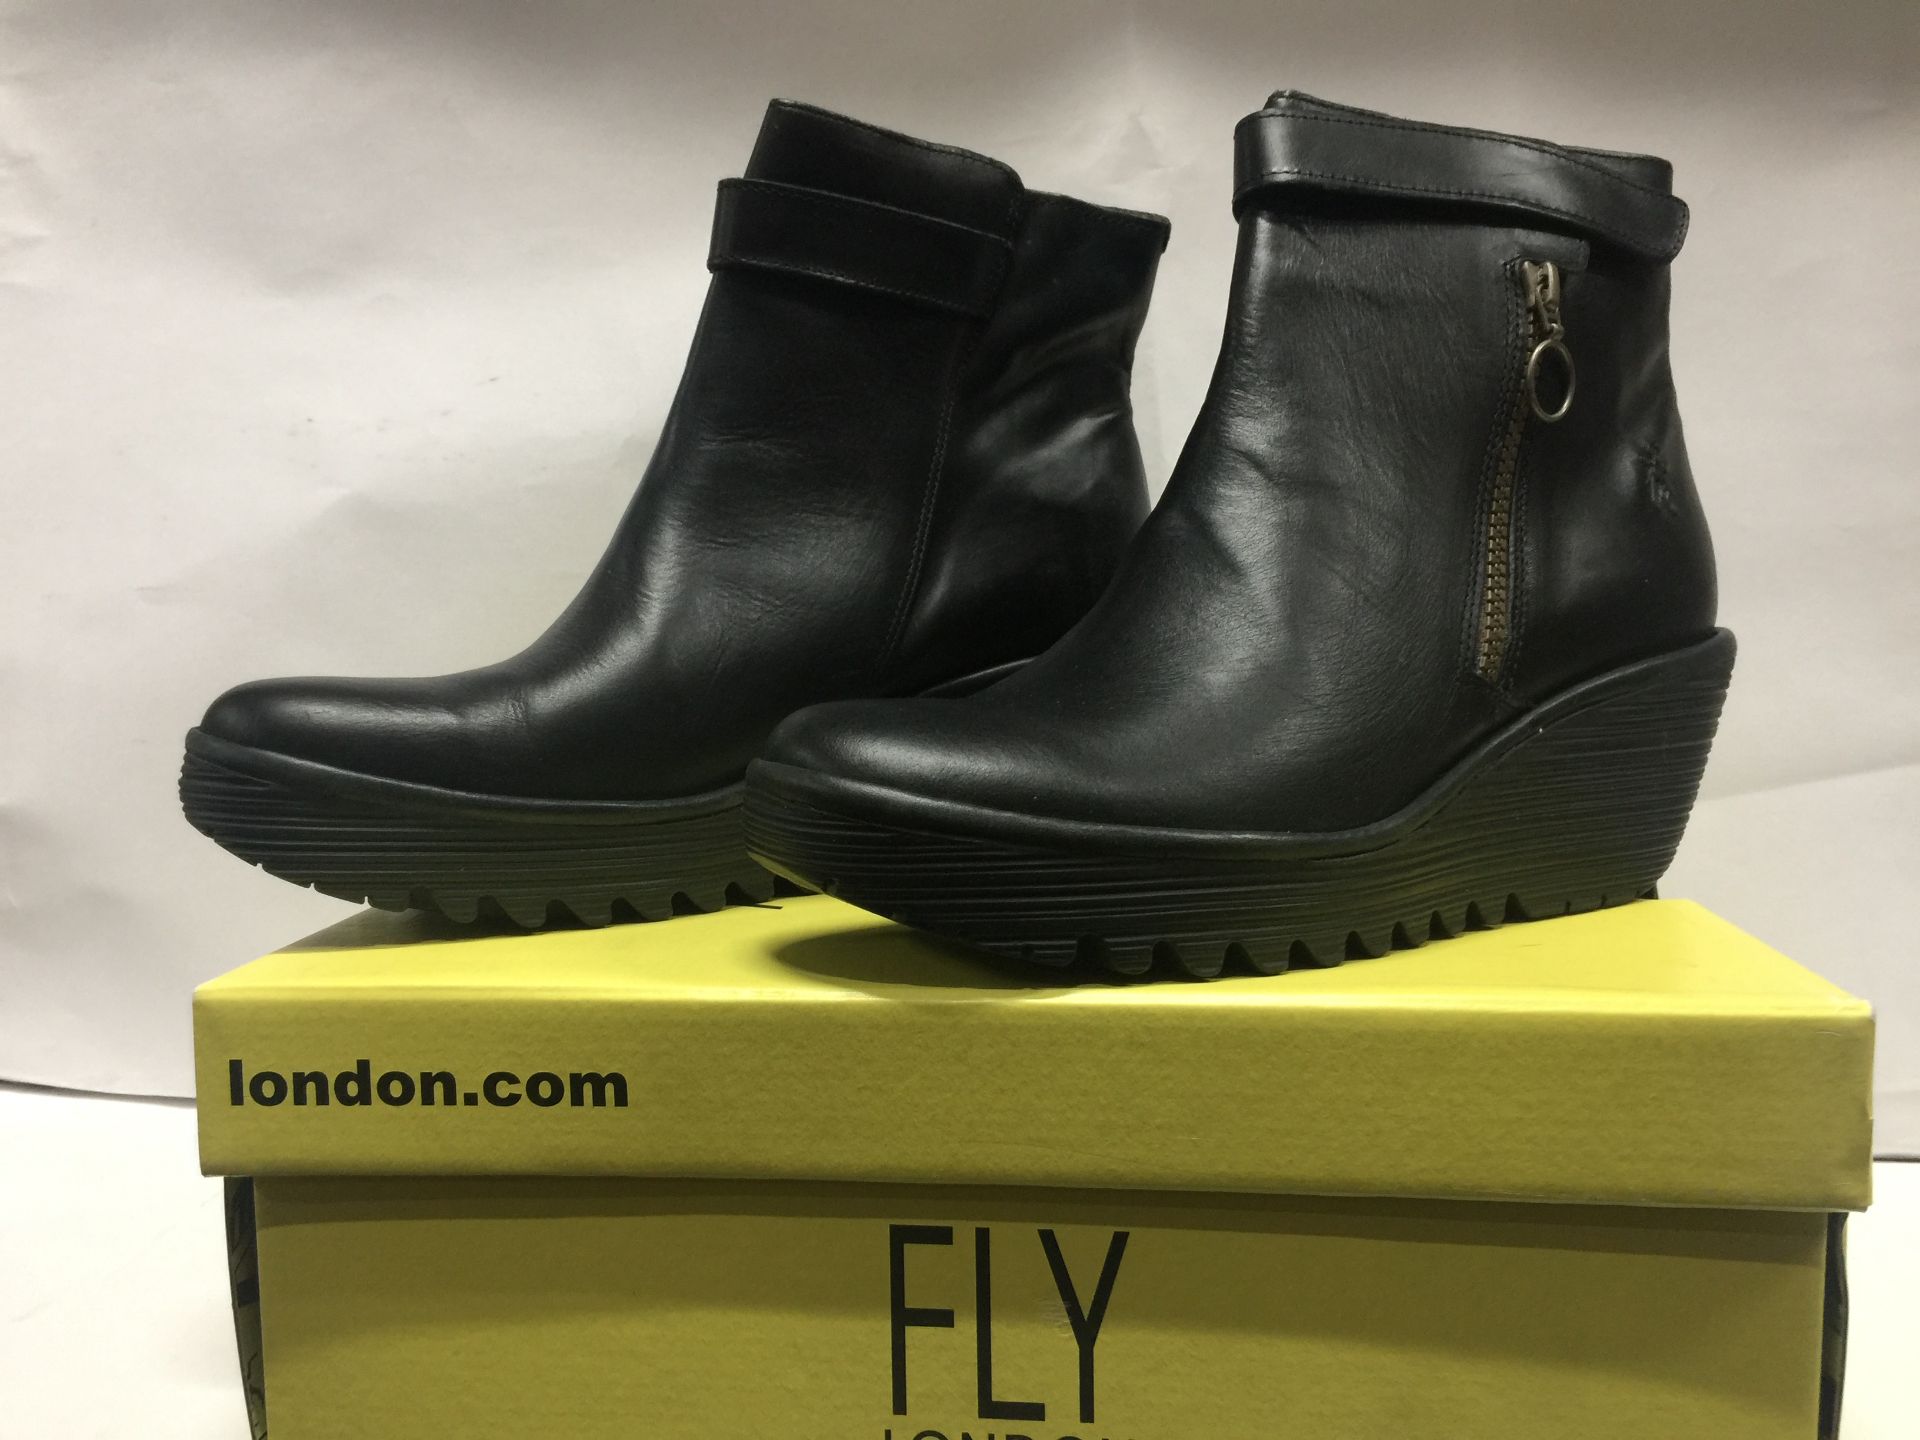 6 x Fly London Women's Boots Mixed Sizes, Styles and Colours Size Ranging EU 38 - EU 42 - Customer R - Image 4 of 5